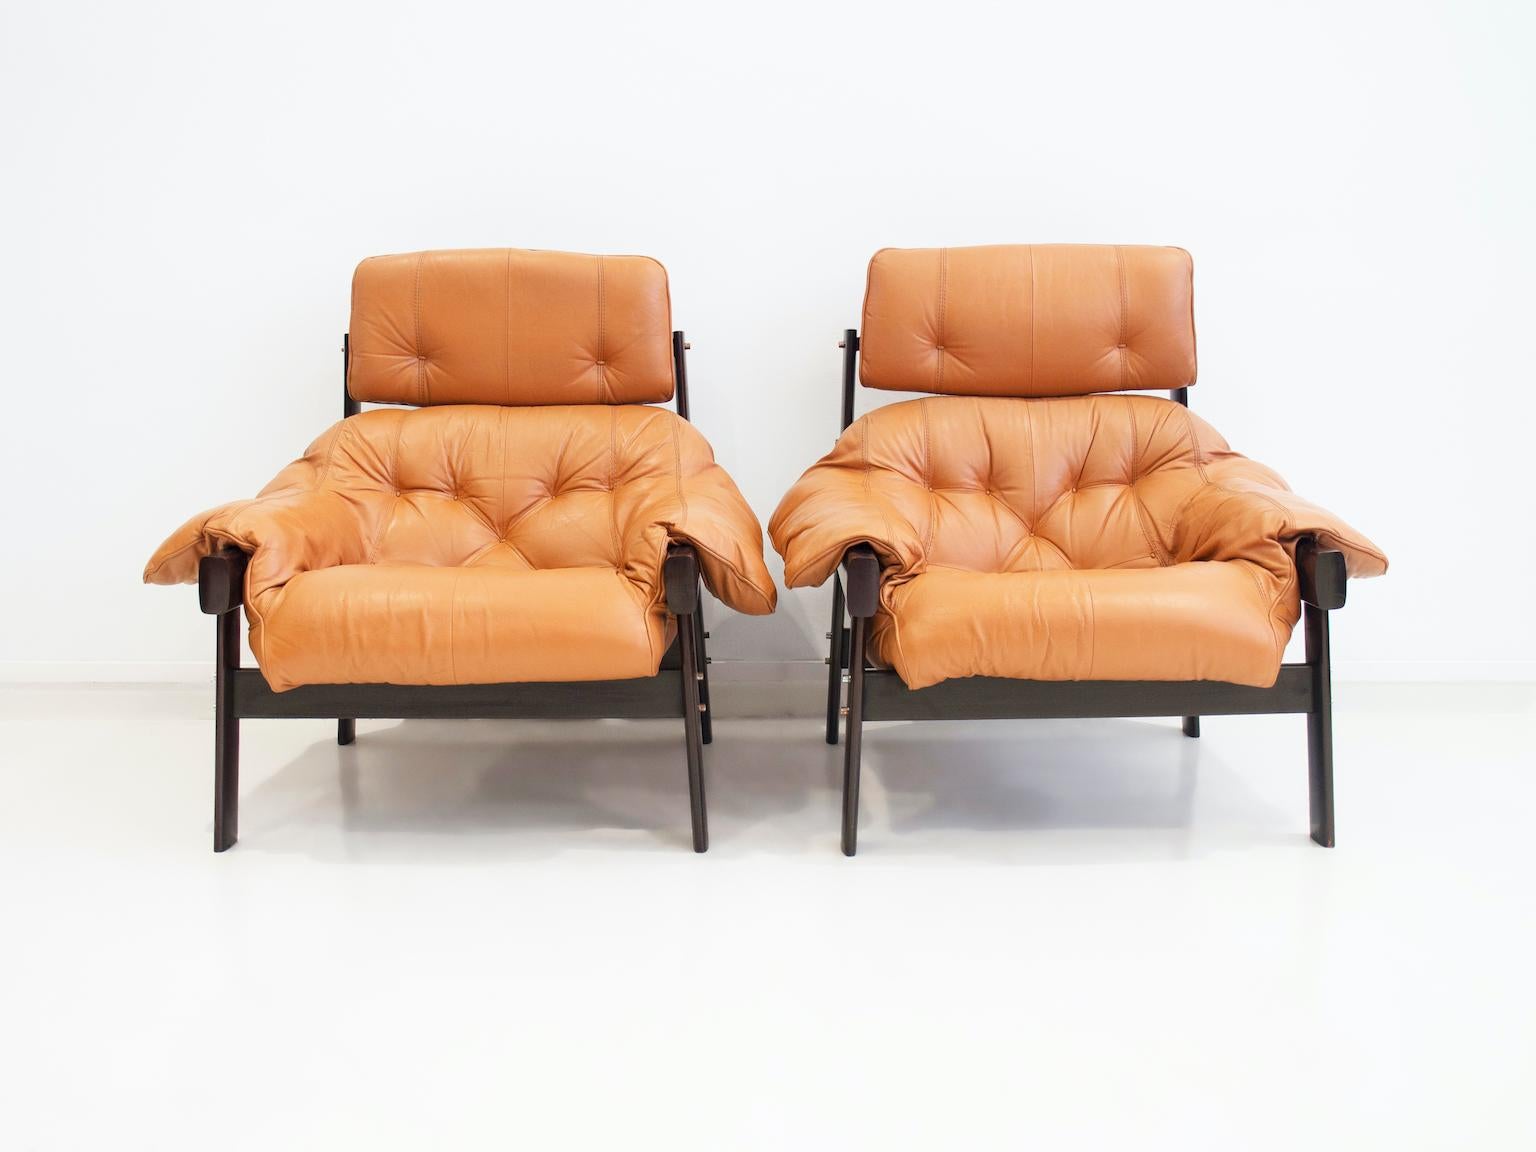 Pair of armchairs with footrests designed by Percival Lafer. Hardwood structure, caramel colored leather upholstery. Manufactured by Lafer MP in Brazil, circa 1970. Footrest measurements: W 71 x D 53 x H 42 cm.